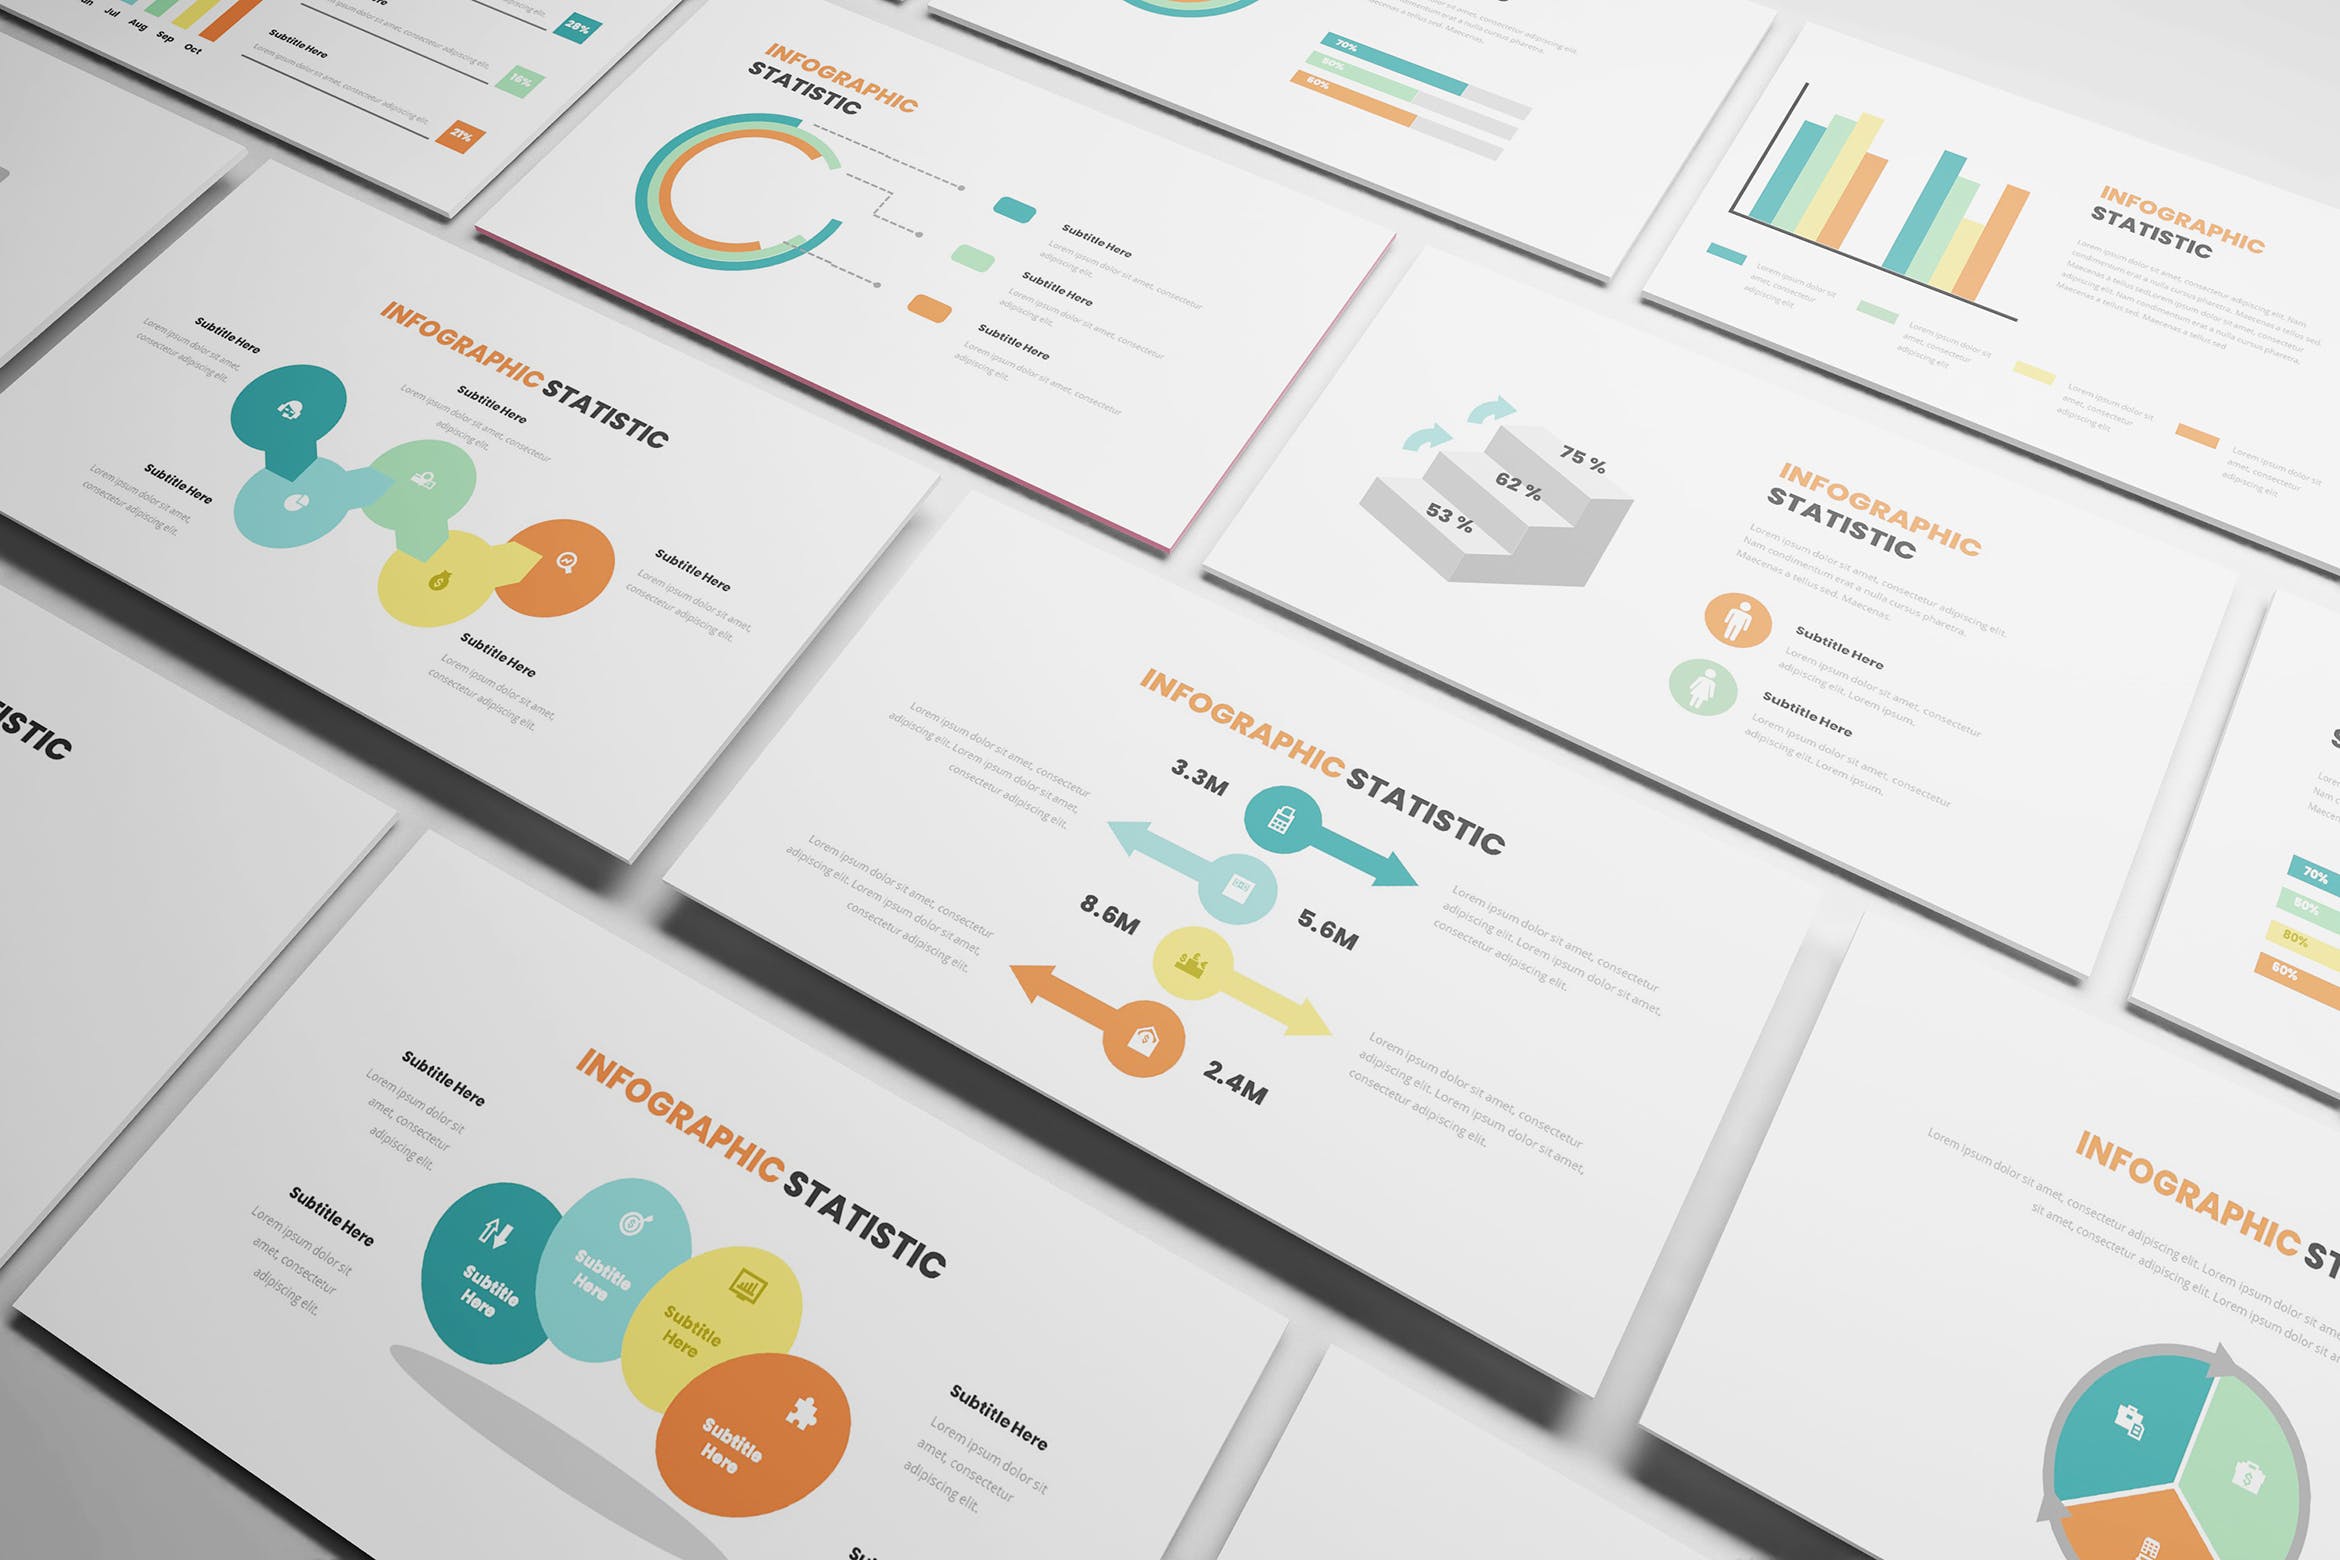 Cover image of Statistic Infographic Powerpoint Template.